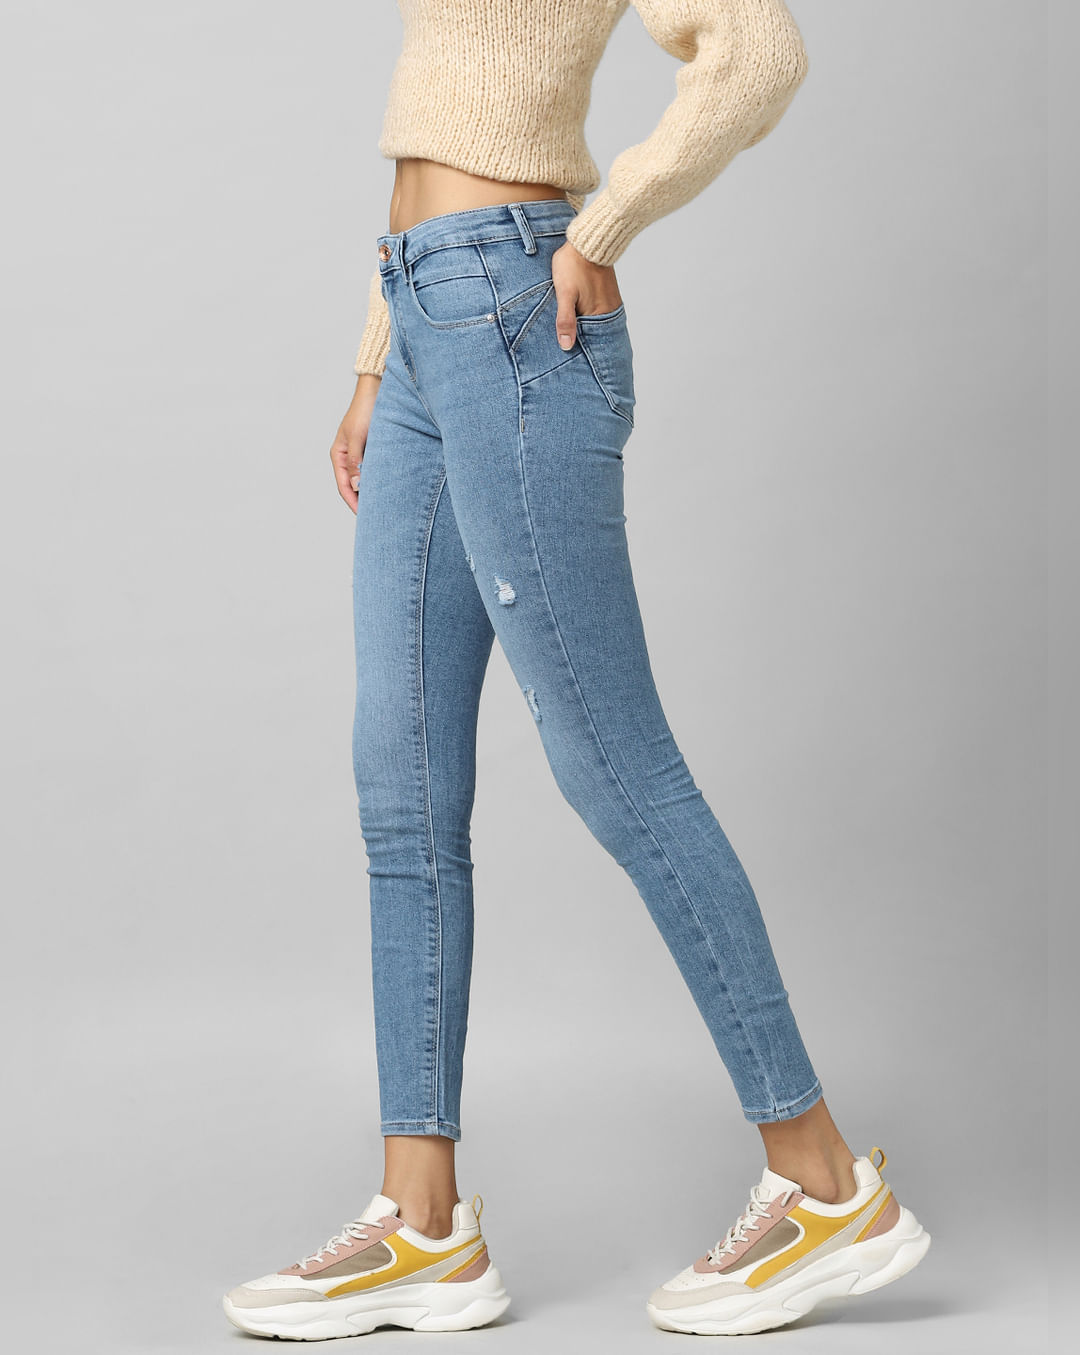 Buy Blue Mid Rise Pushup Distressed Skinny Jeans For Women - ONLY